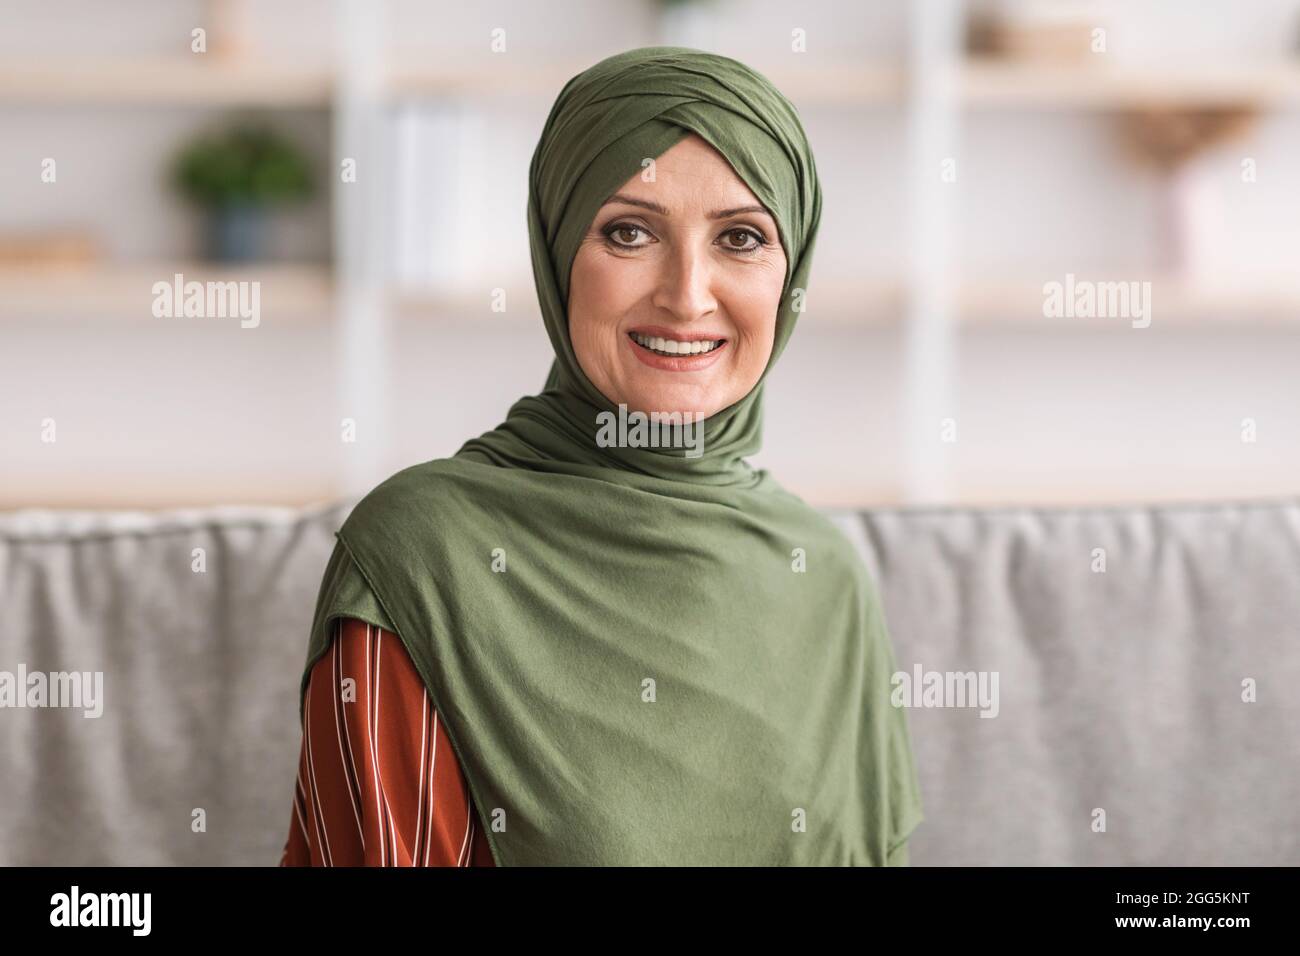 Portrait Of Happy Mature Middle-Eastern Woman Wearing Hijab At Home Stock Photo